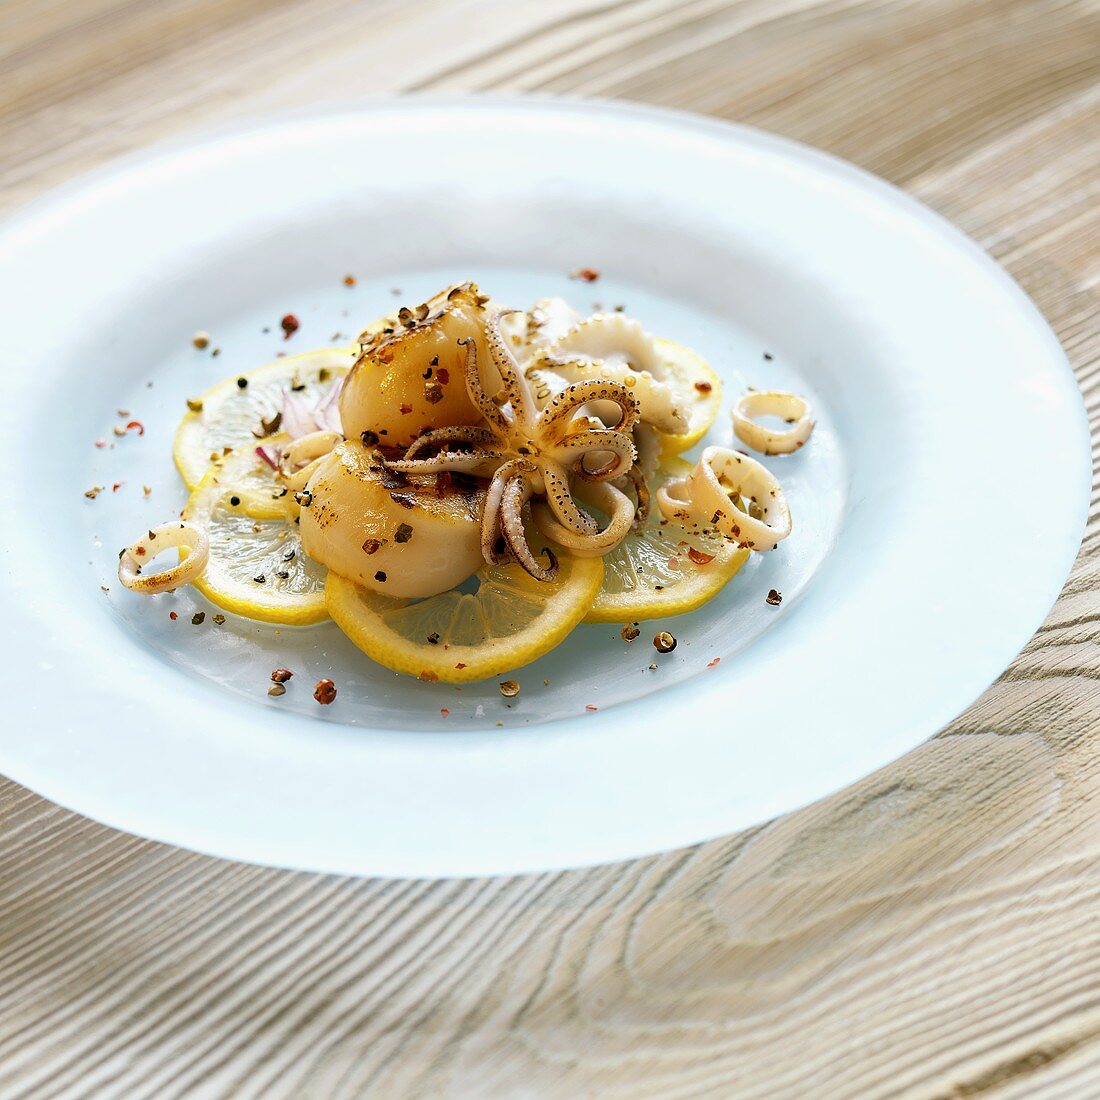 Scallops and Squid Over Lemon Slices on a Plate